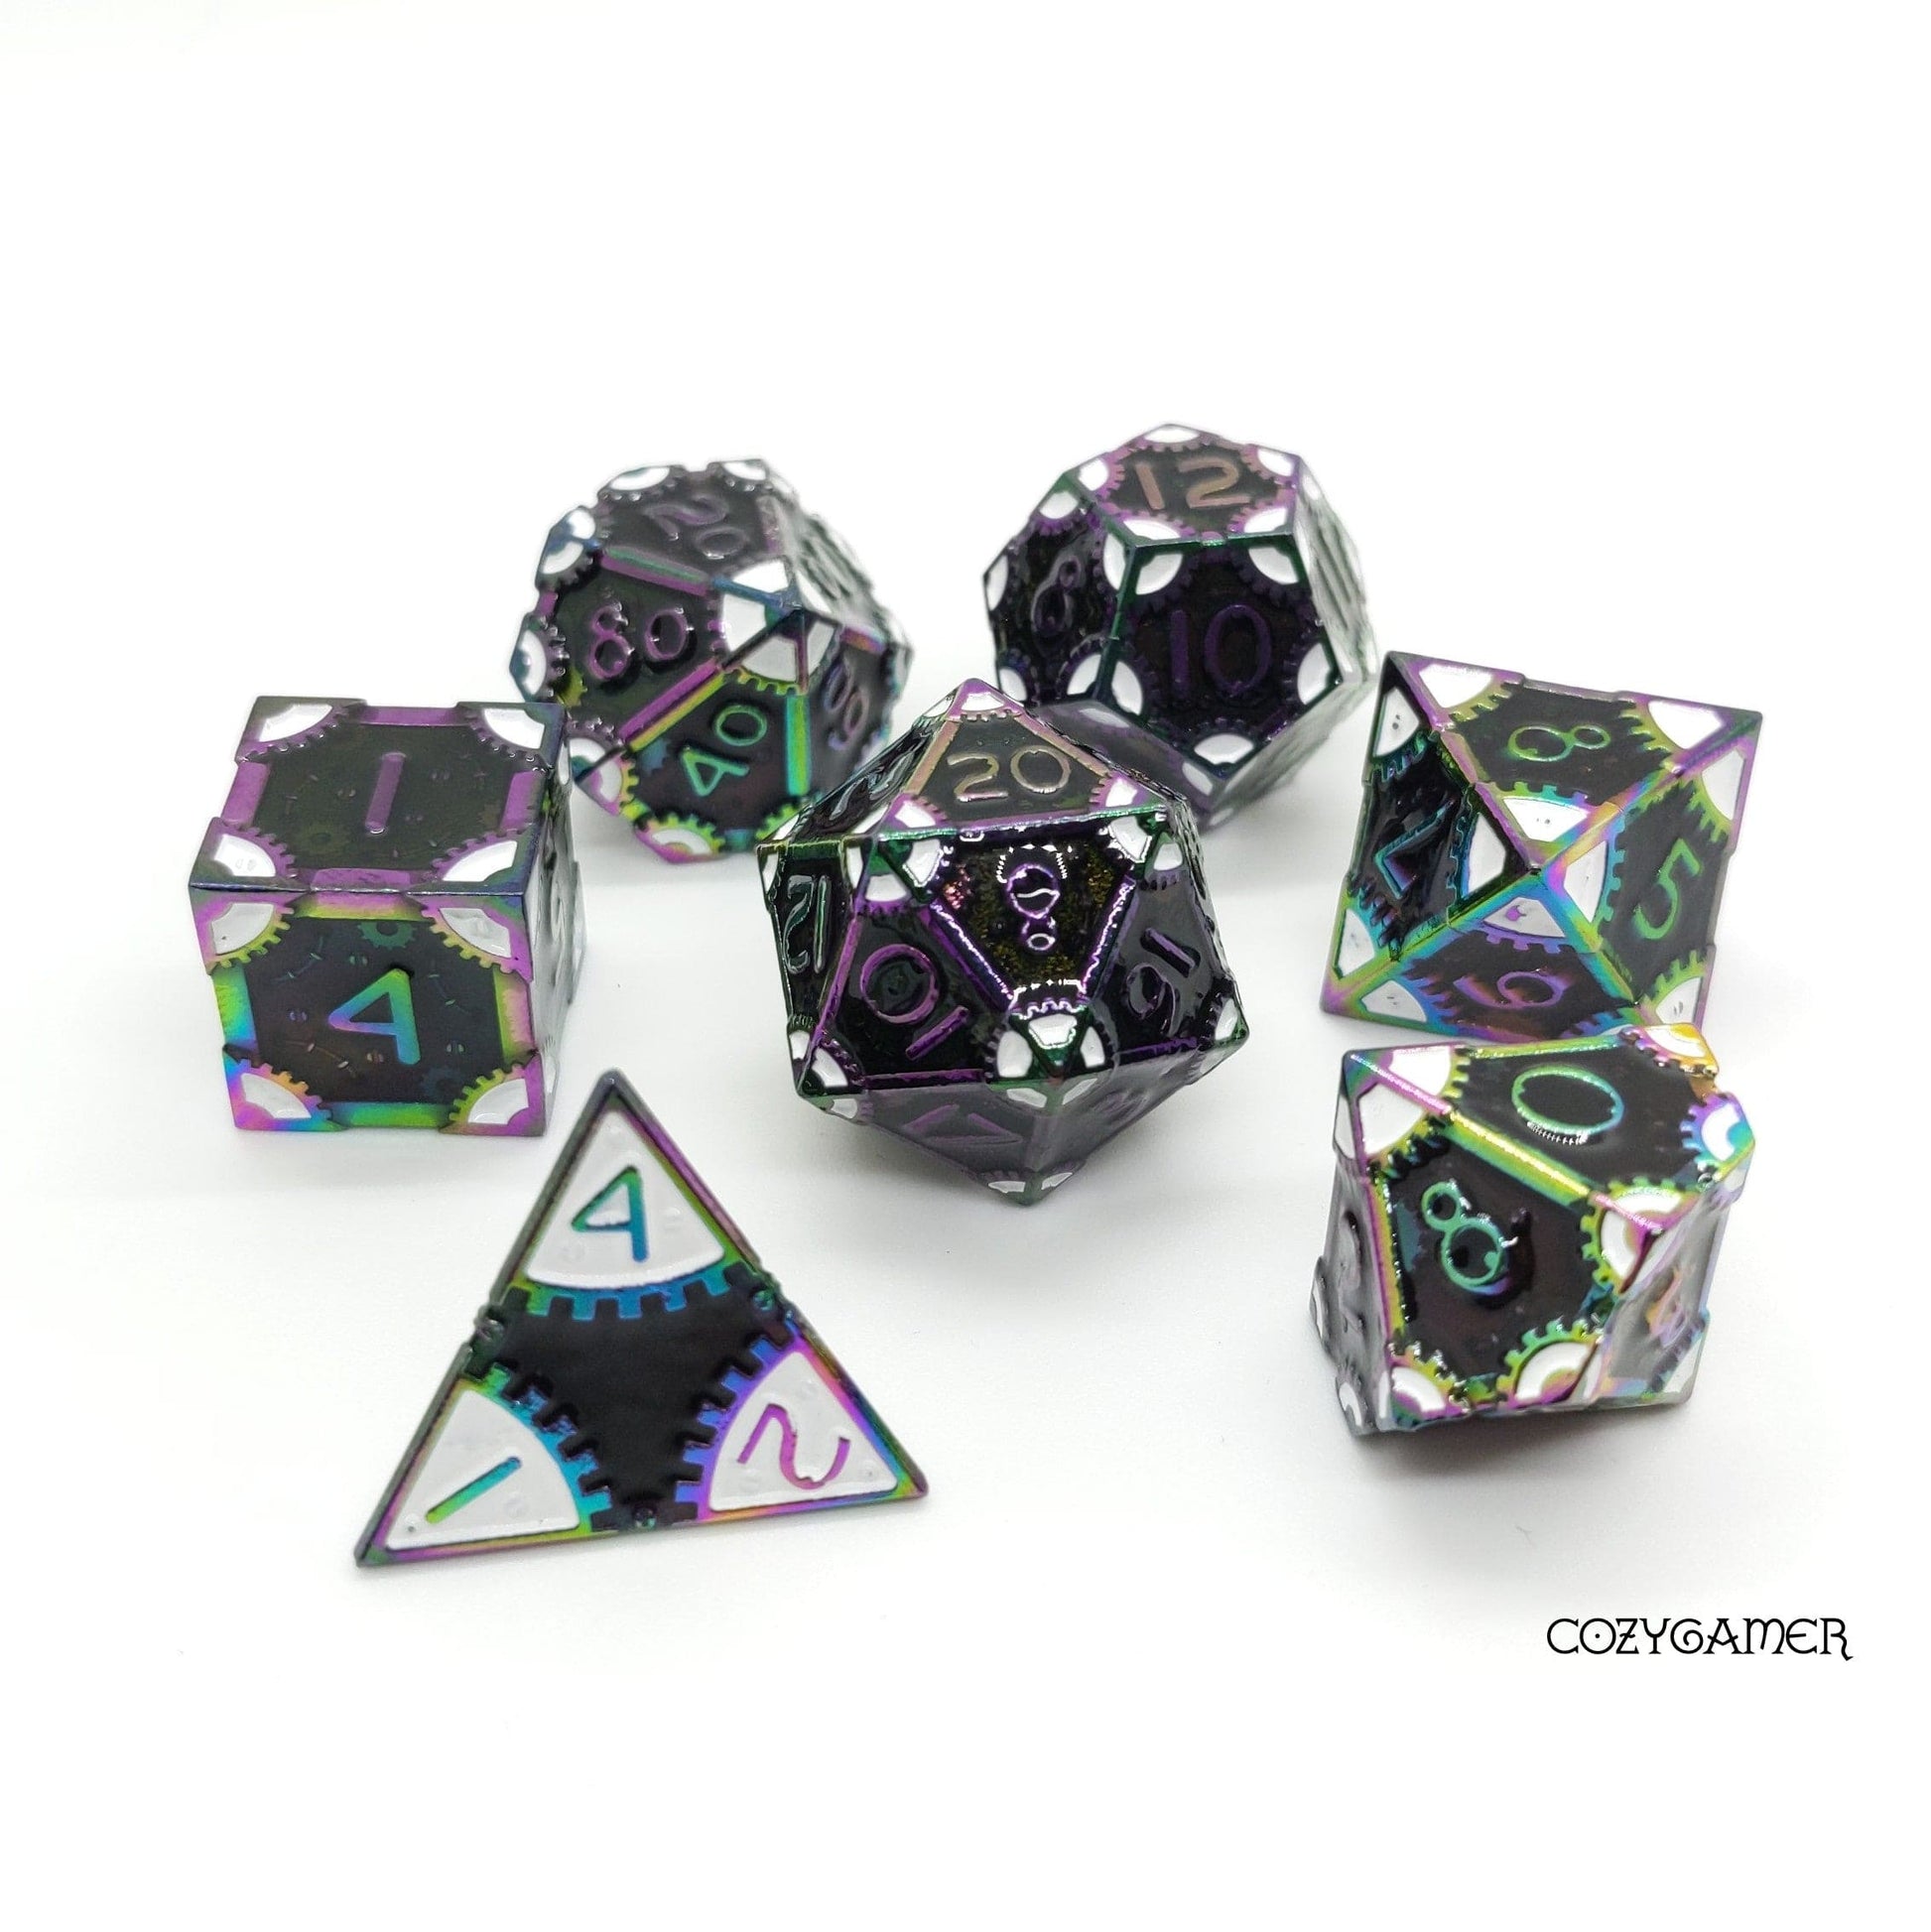 Black and White Gear Metal Dice Set with Rainbow Trim